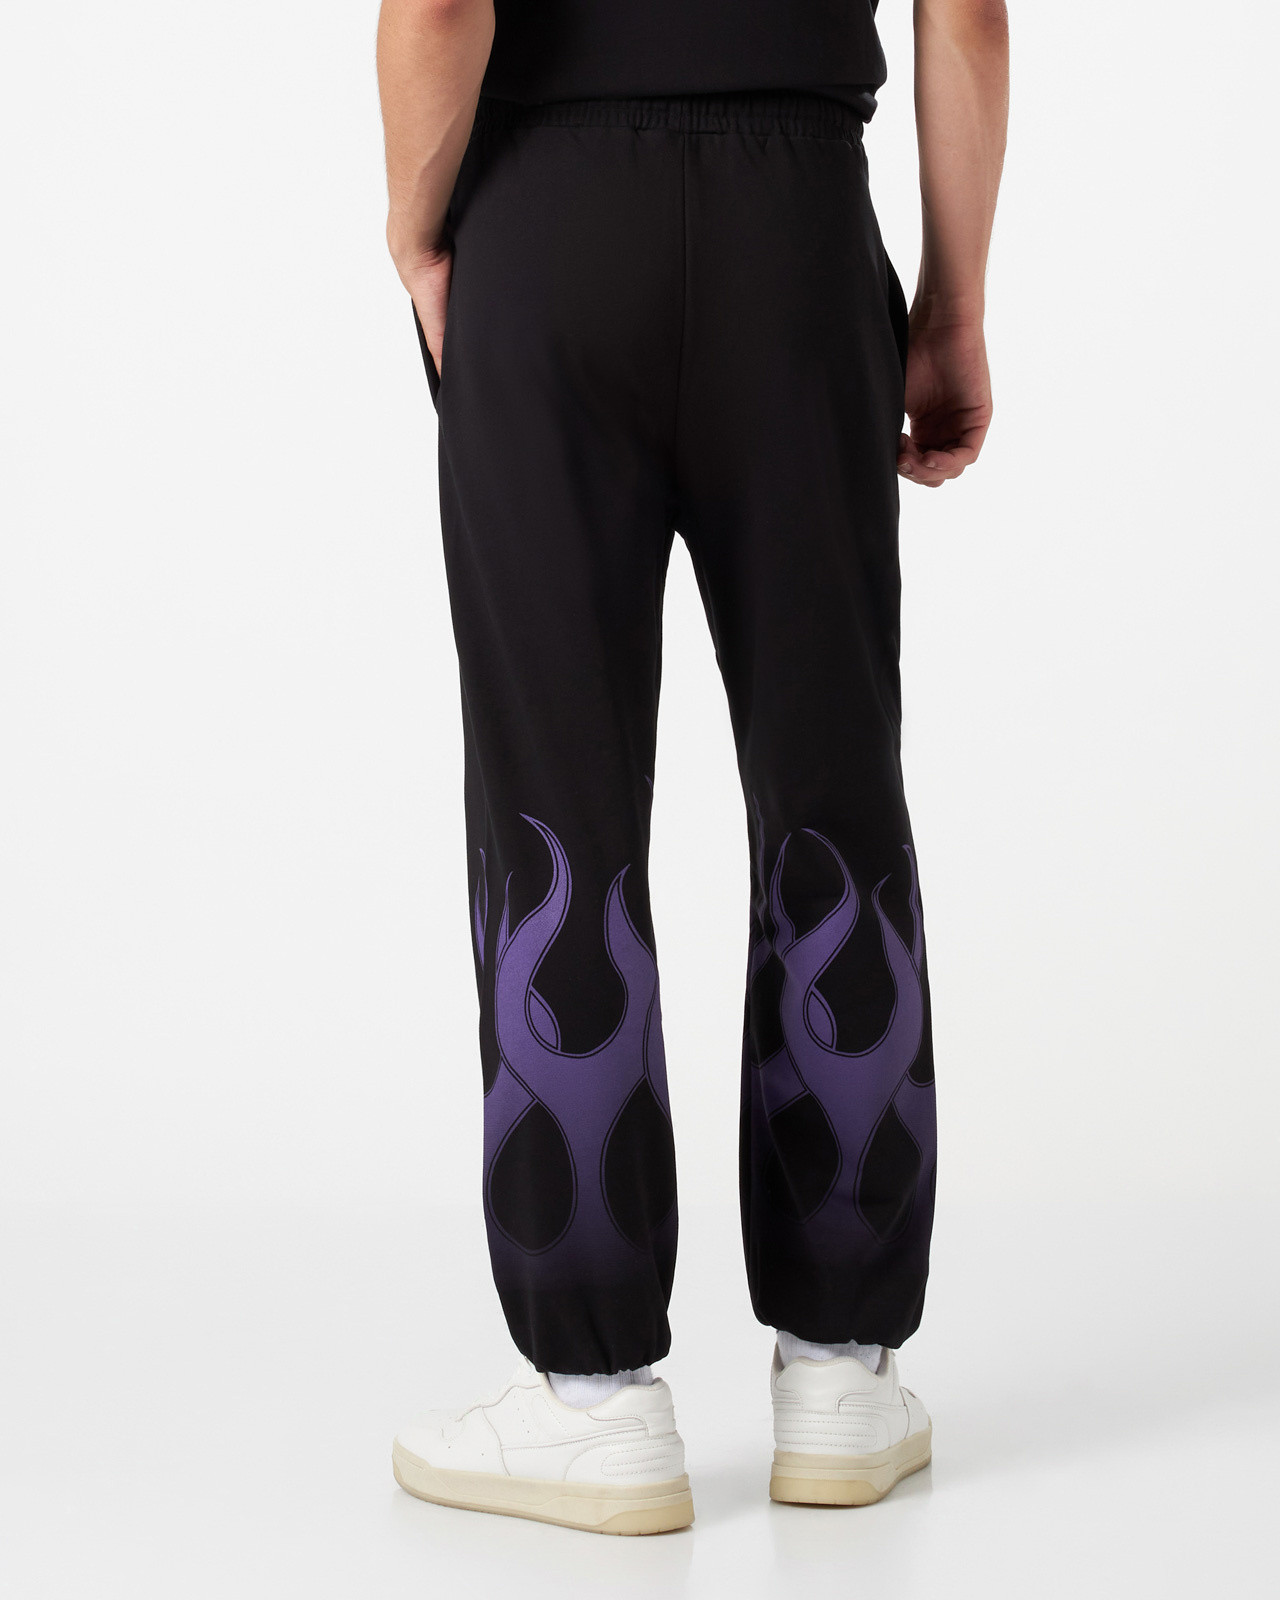 Vision of Super - Pants with racing flames, Black, large image number 4